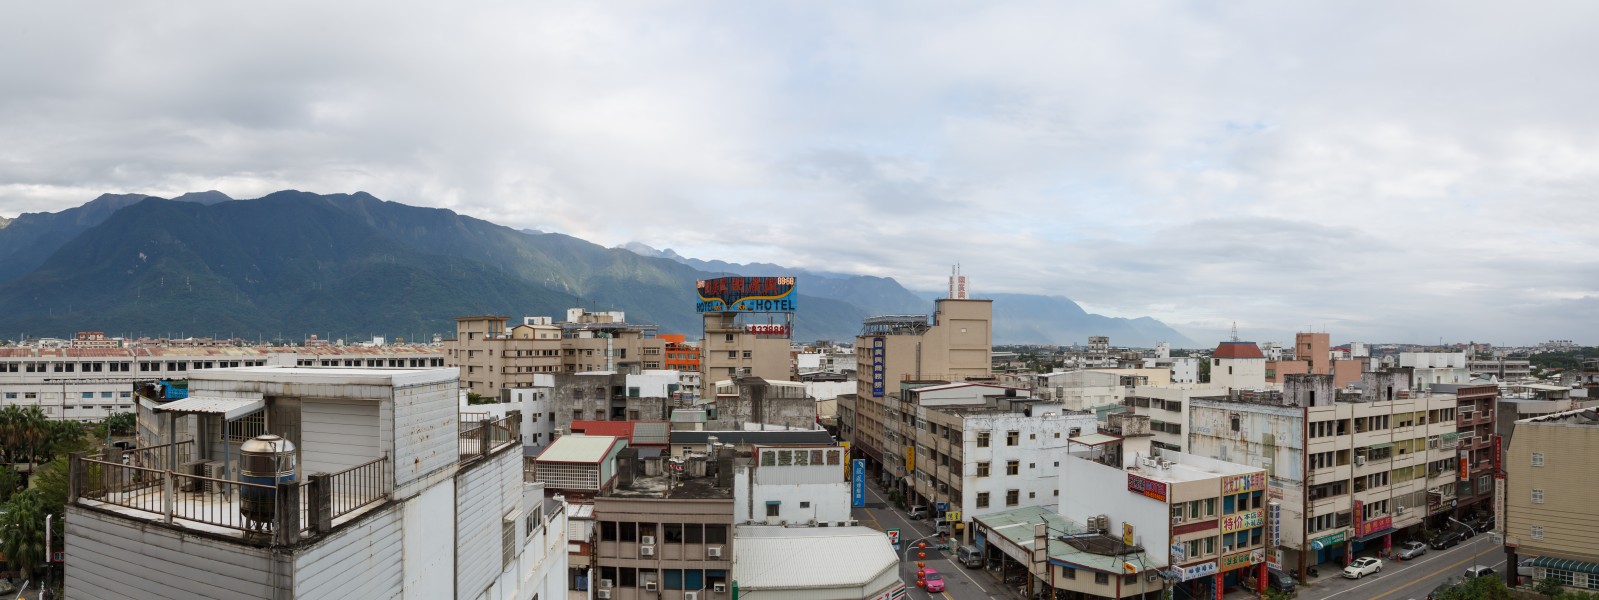 Hualien Taiwan cityscape with mountains